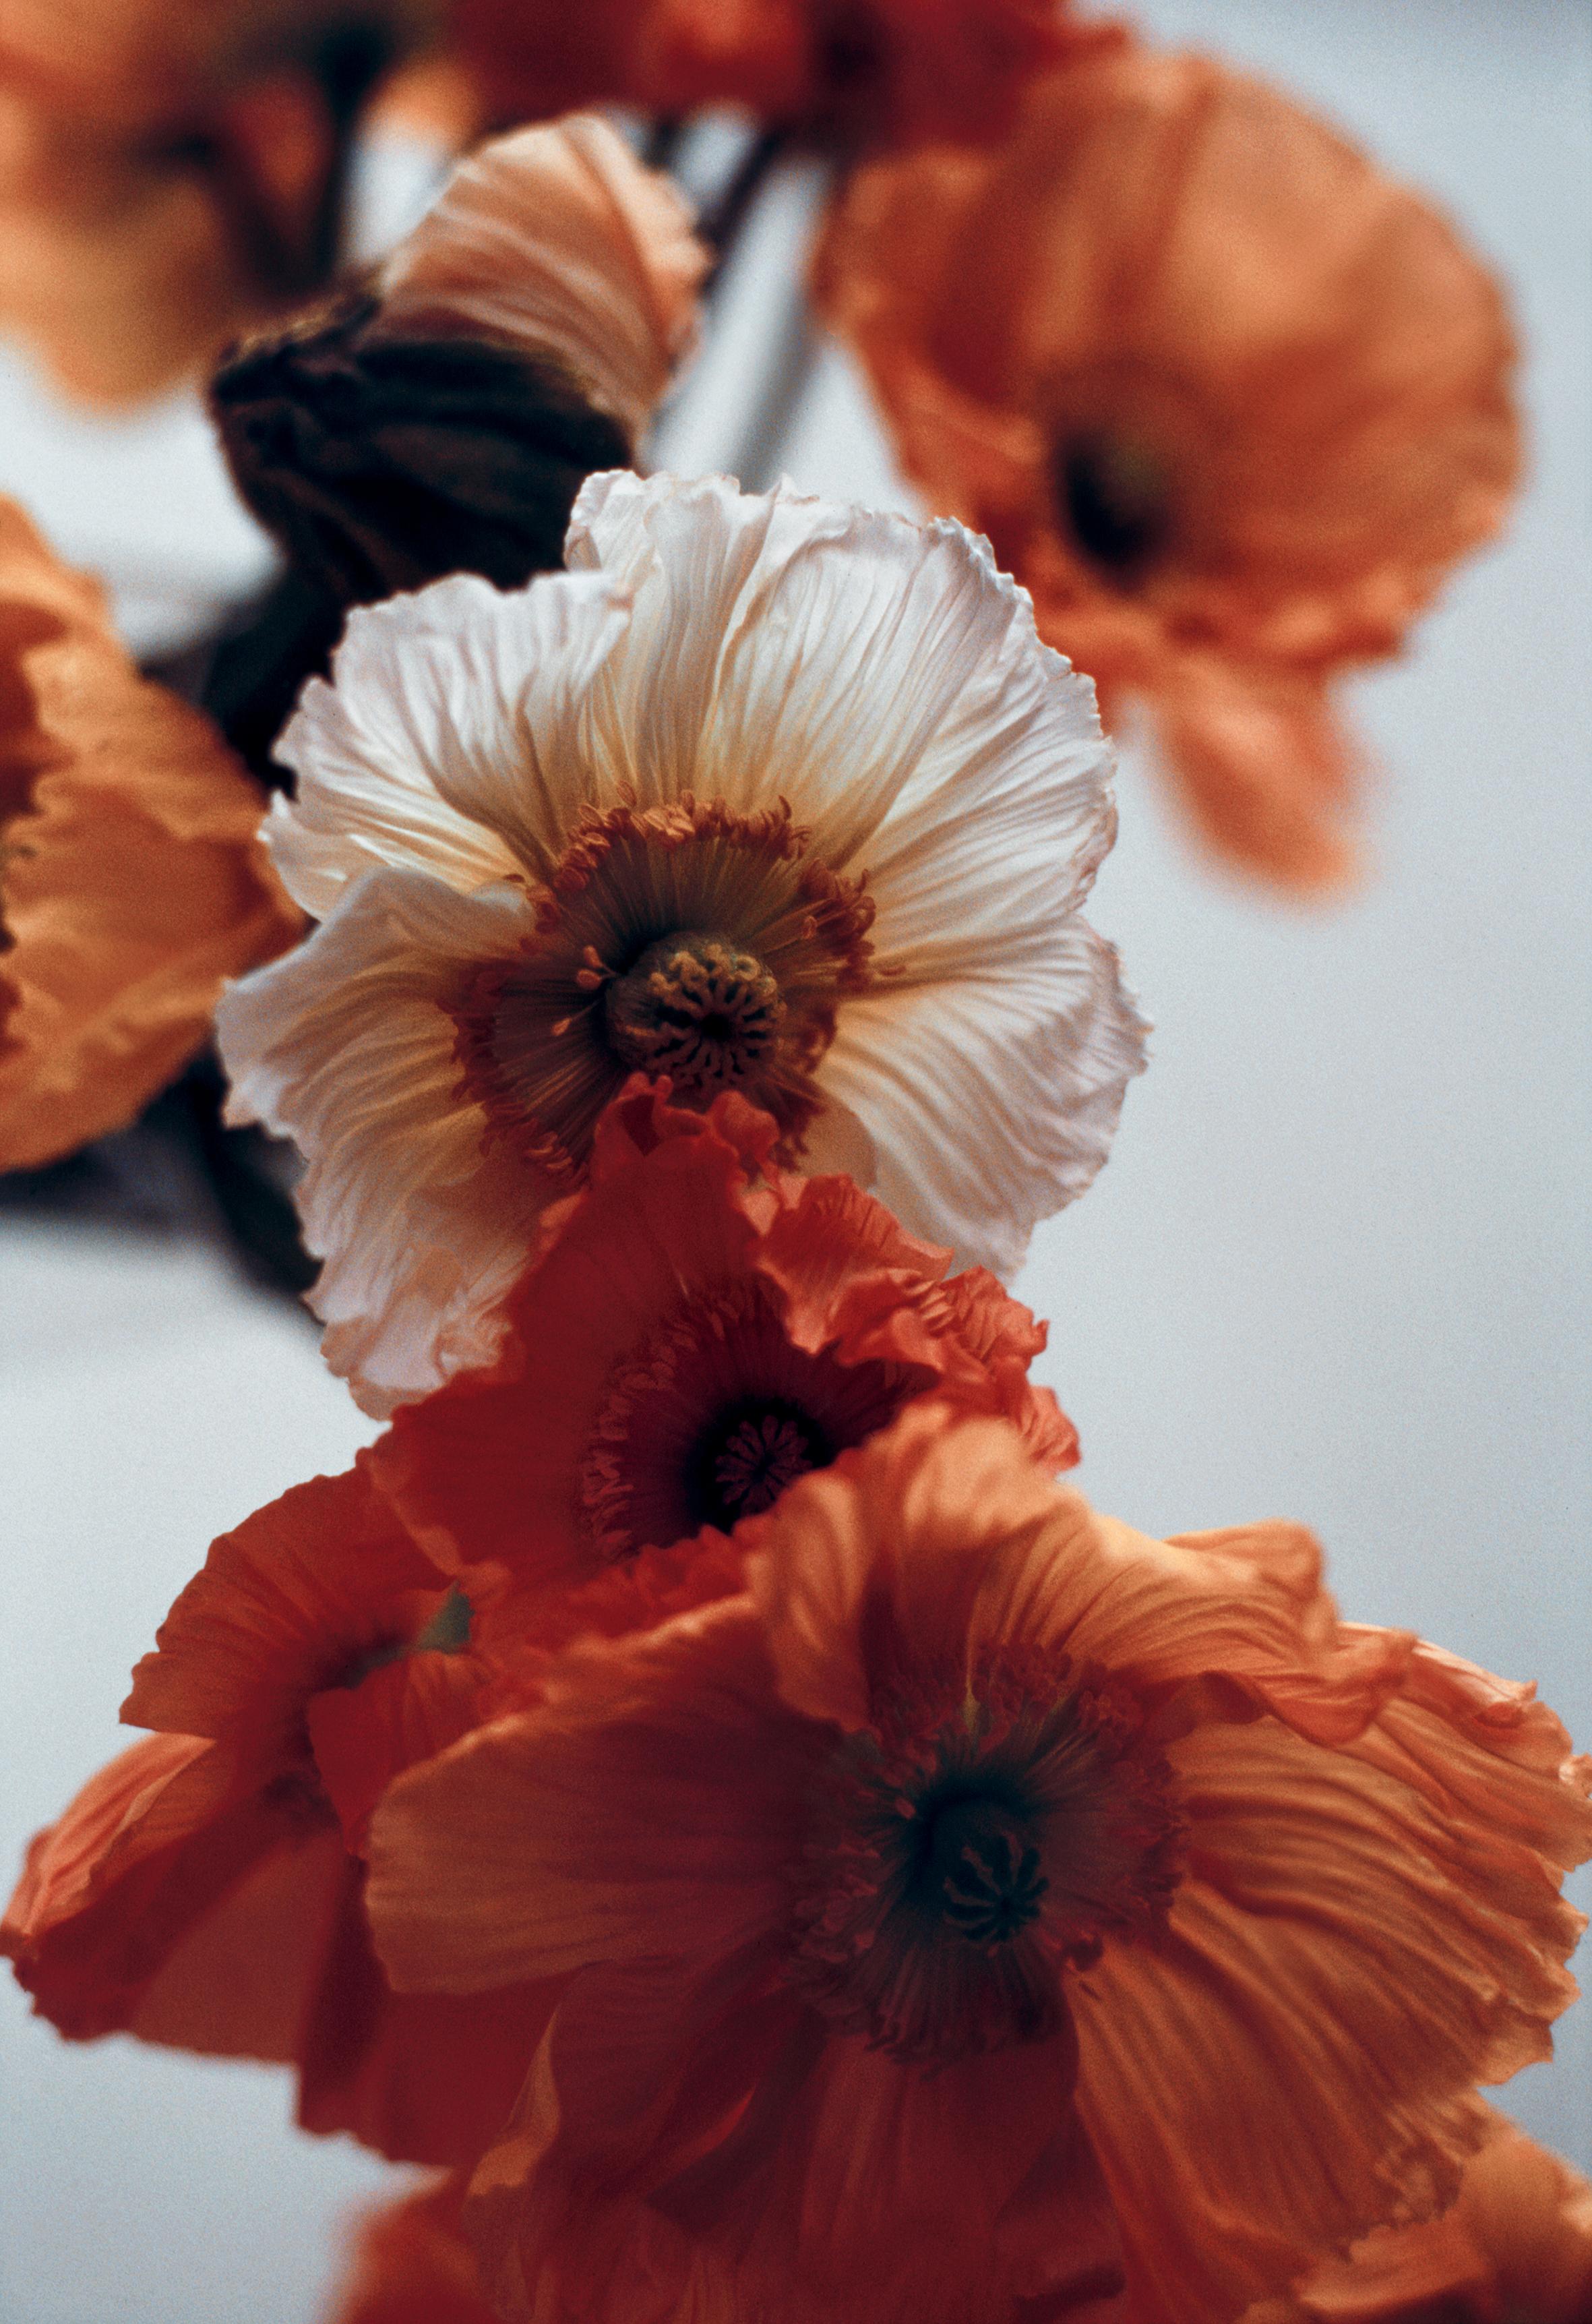 Ugne Pouwell Still-Life Photograph - Orange Poppies No.4 - Analogue floral photography, Limited edition of 20